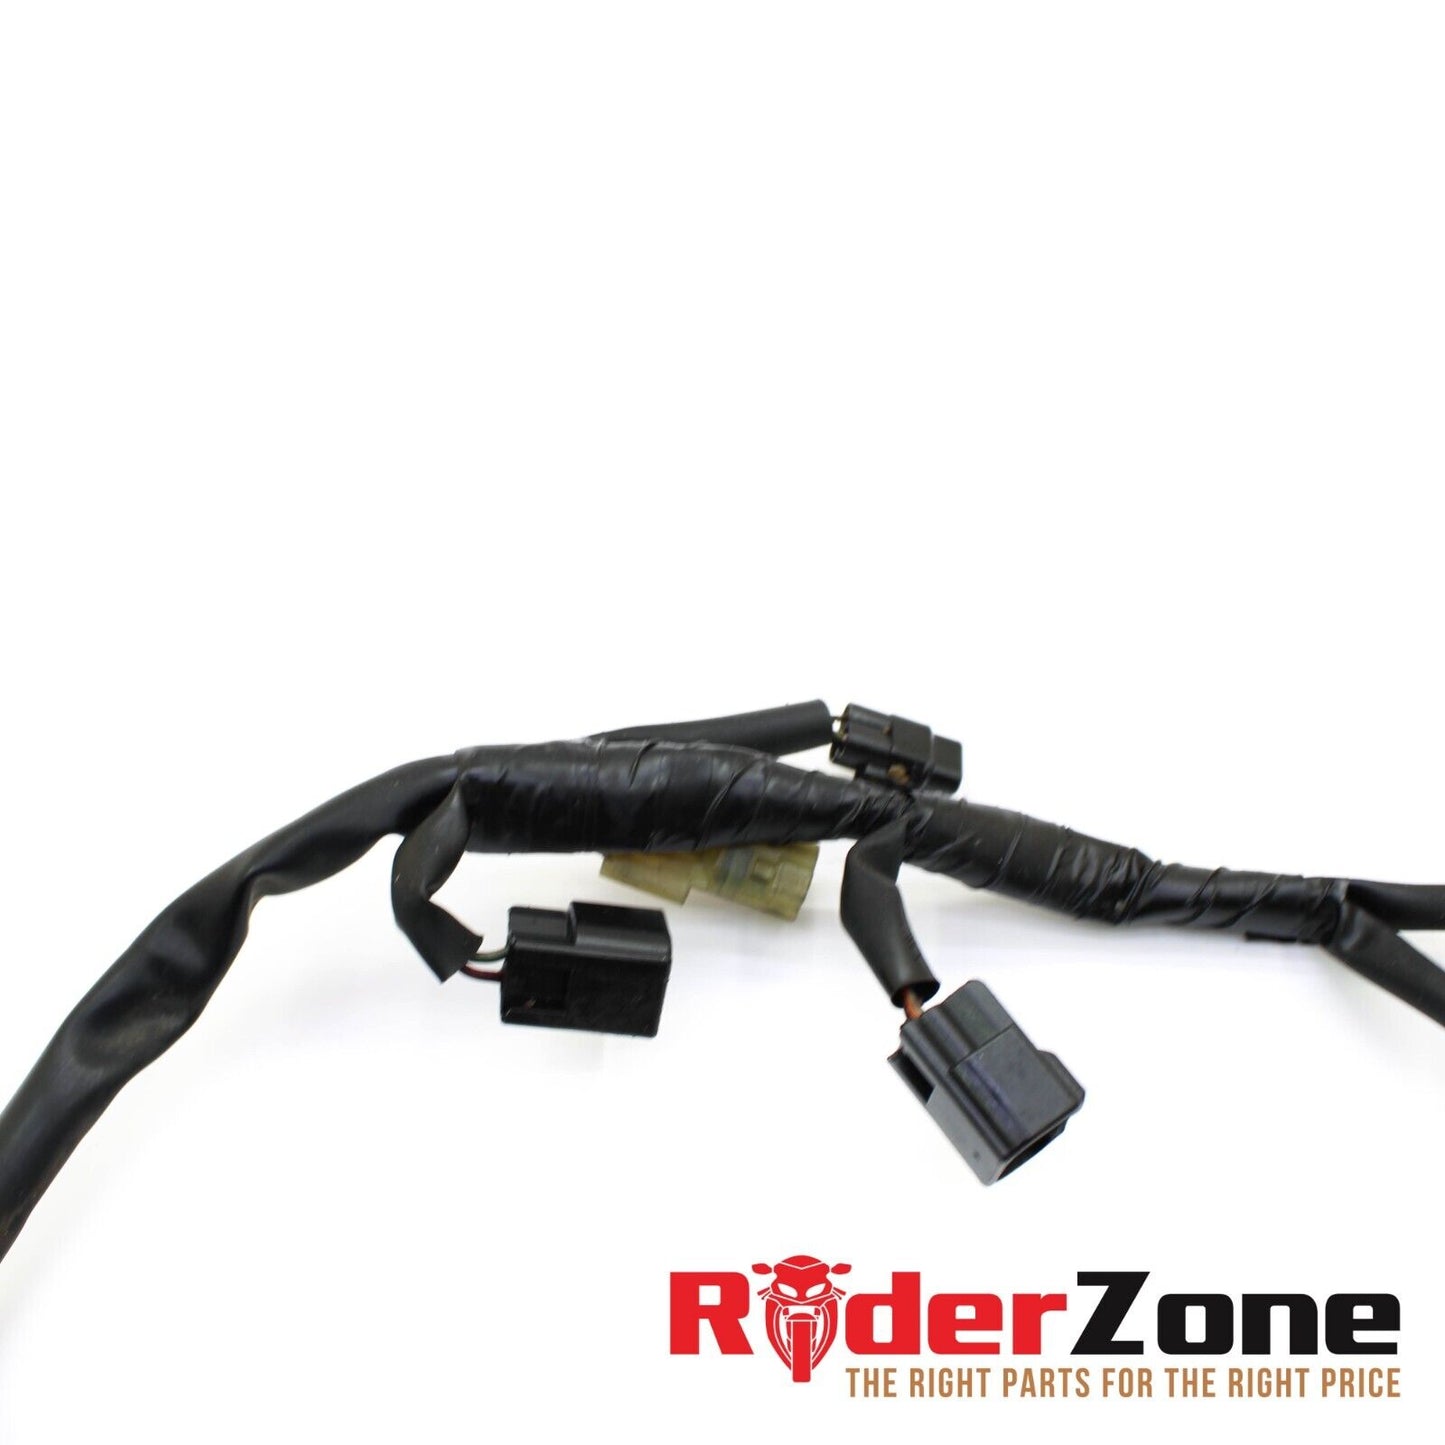 2007 2008 YAMAHA YZF R1 IGNITION COIL WIRING HARNESS LOOM ELECTRICAL SYSTEM